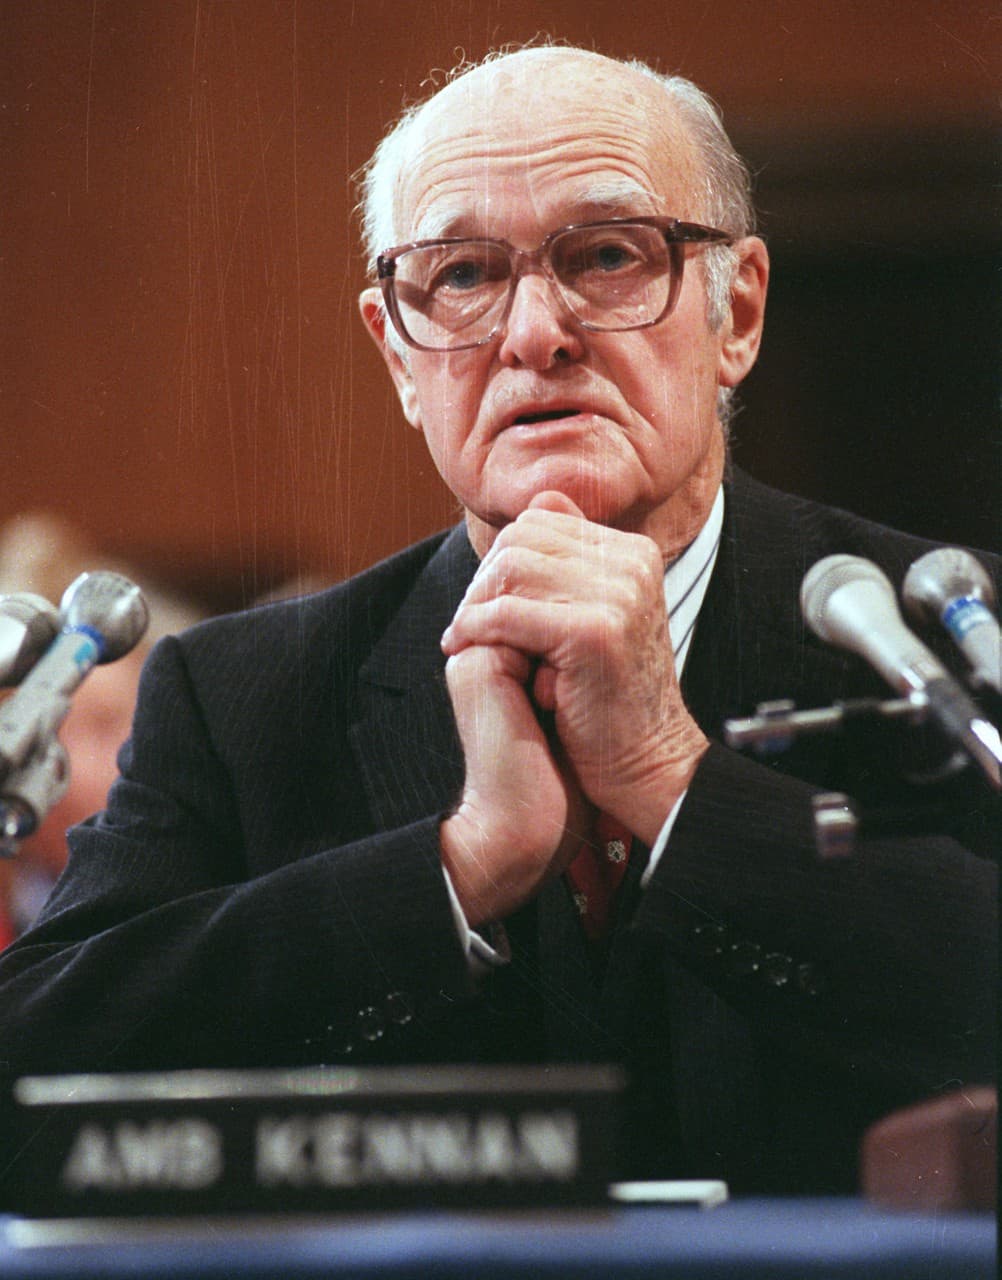 Amb. George F. Kennan, who gave the name "containment" to postwar foreign policy in a famous but anonymous article, testifies before the Senate Foreign Relations Committee in this Jan. 1990 photo. (AP)